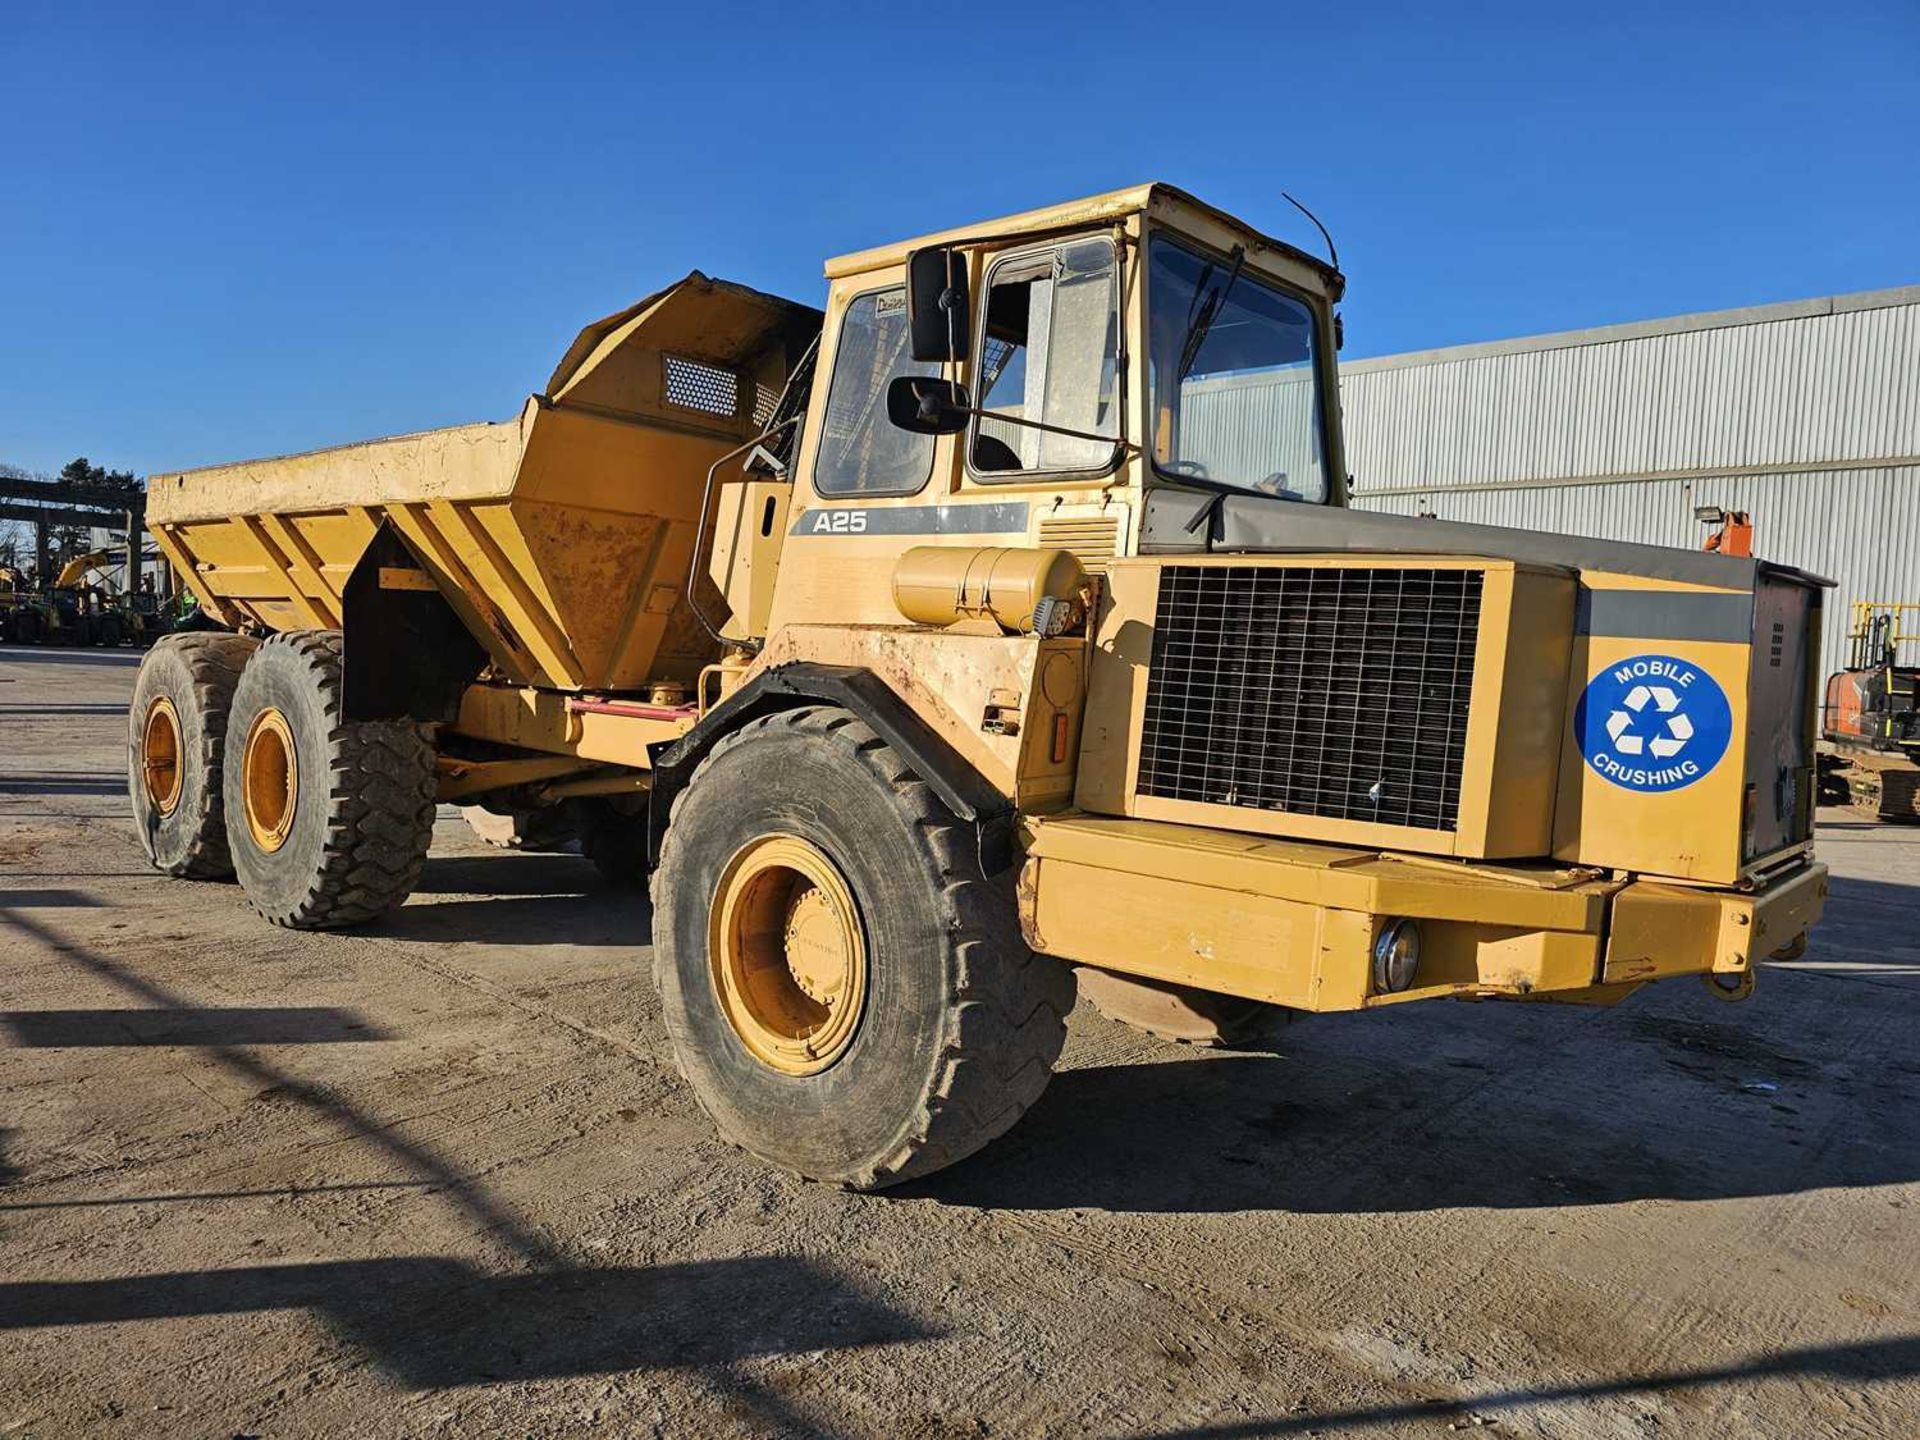 Volvo A25 6x6 Articulated Dumptruck, Reverse Camera - Image 8 of 27